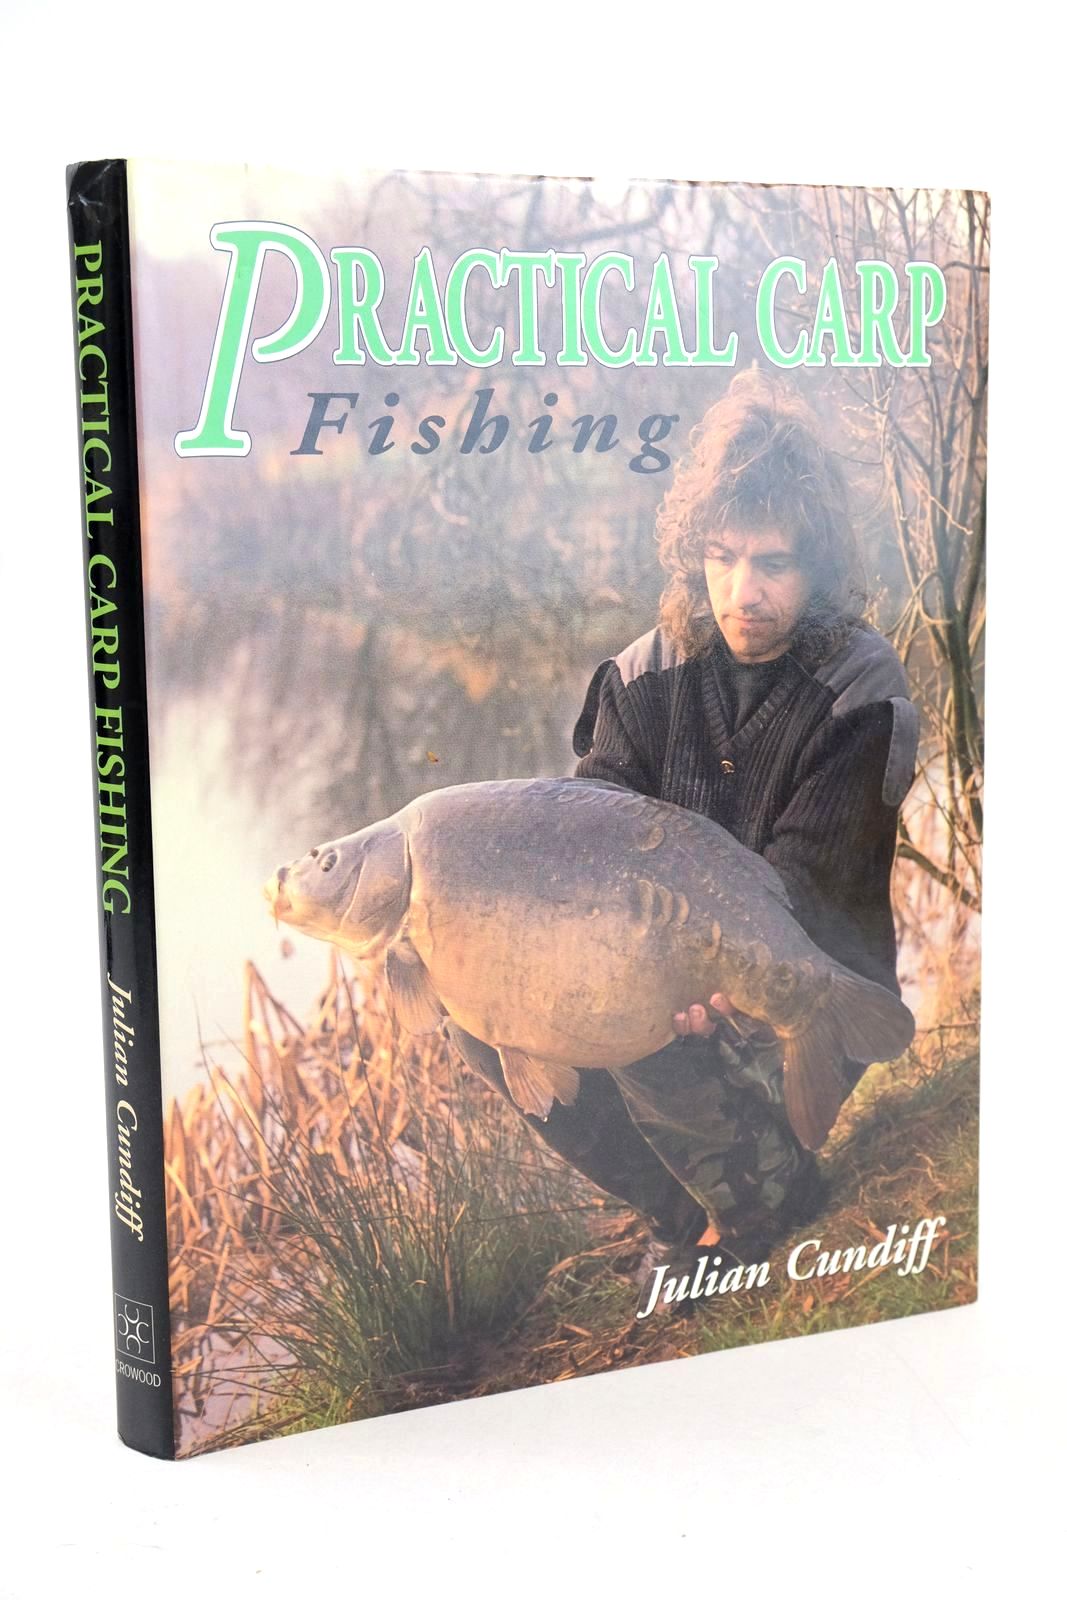 Photo of PRATICAL CARP FISHING written by Cundiff, Julian published by The Crowood Press (STOCK CODE: 1327572)  for sale by Stella & Rose's Books